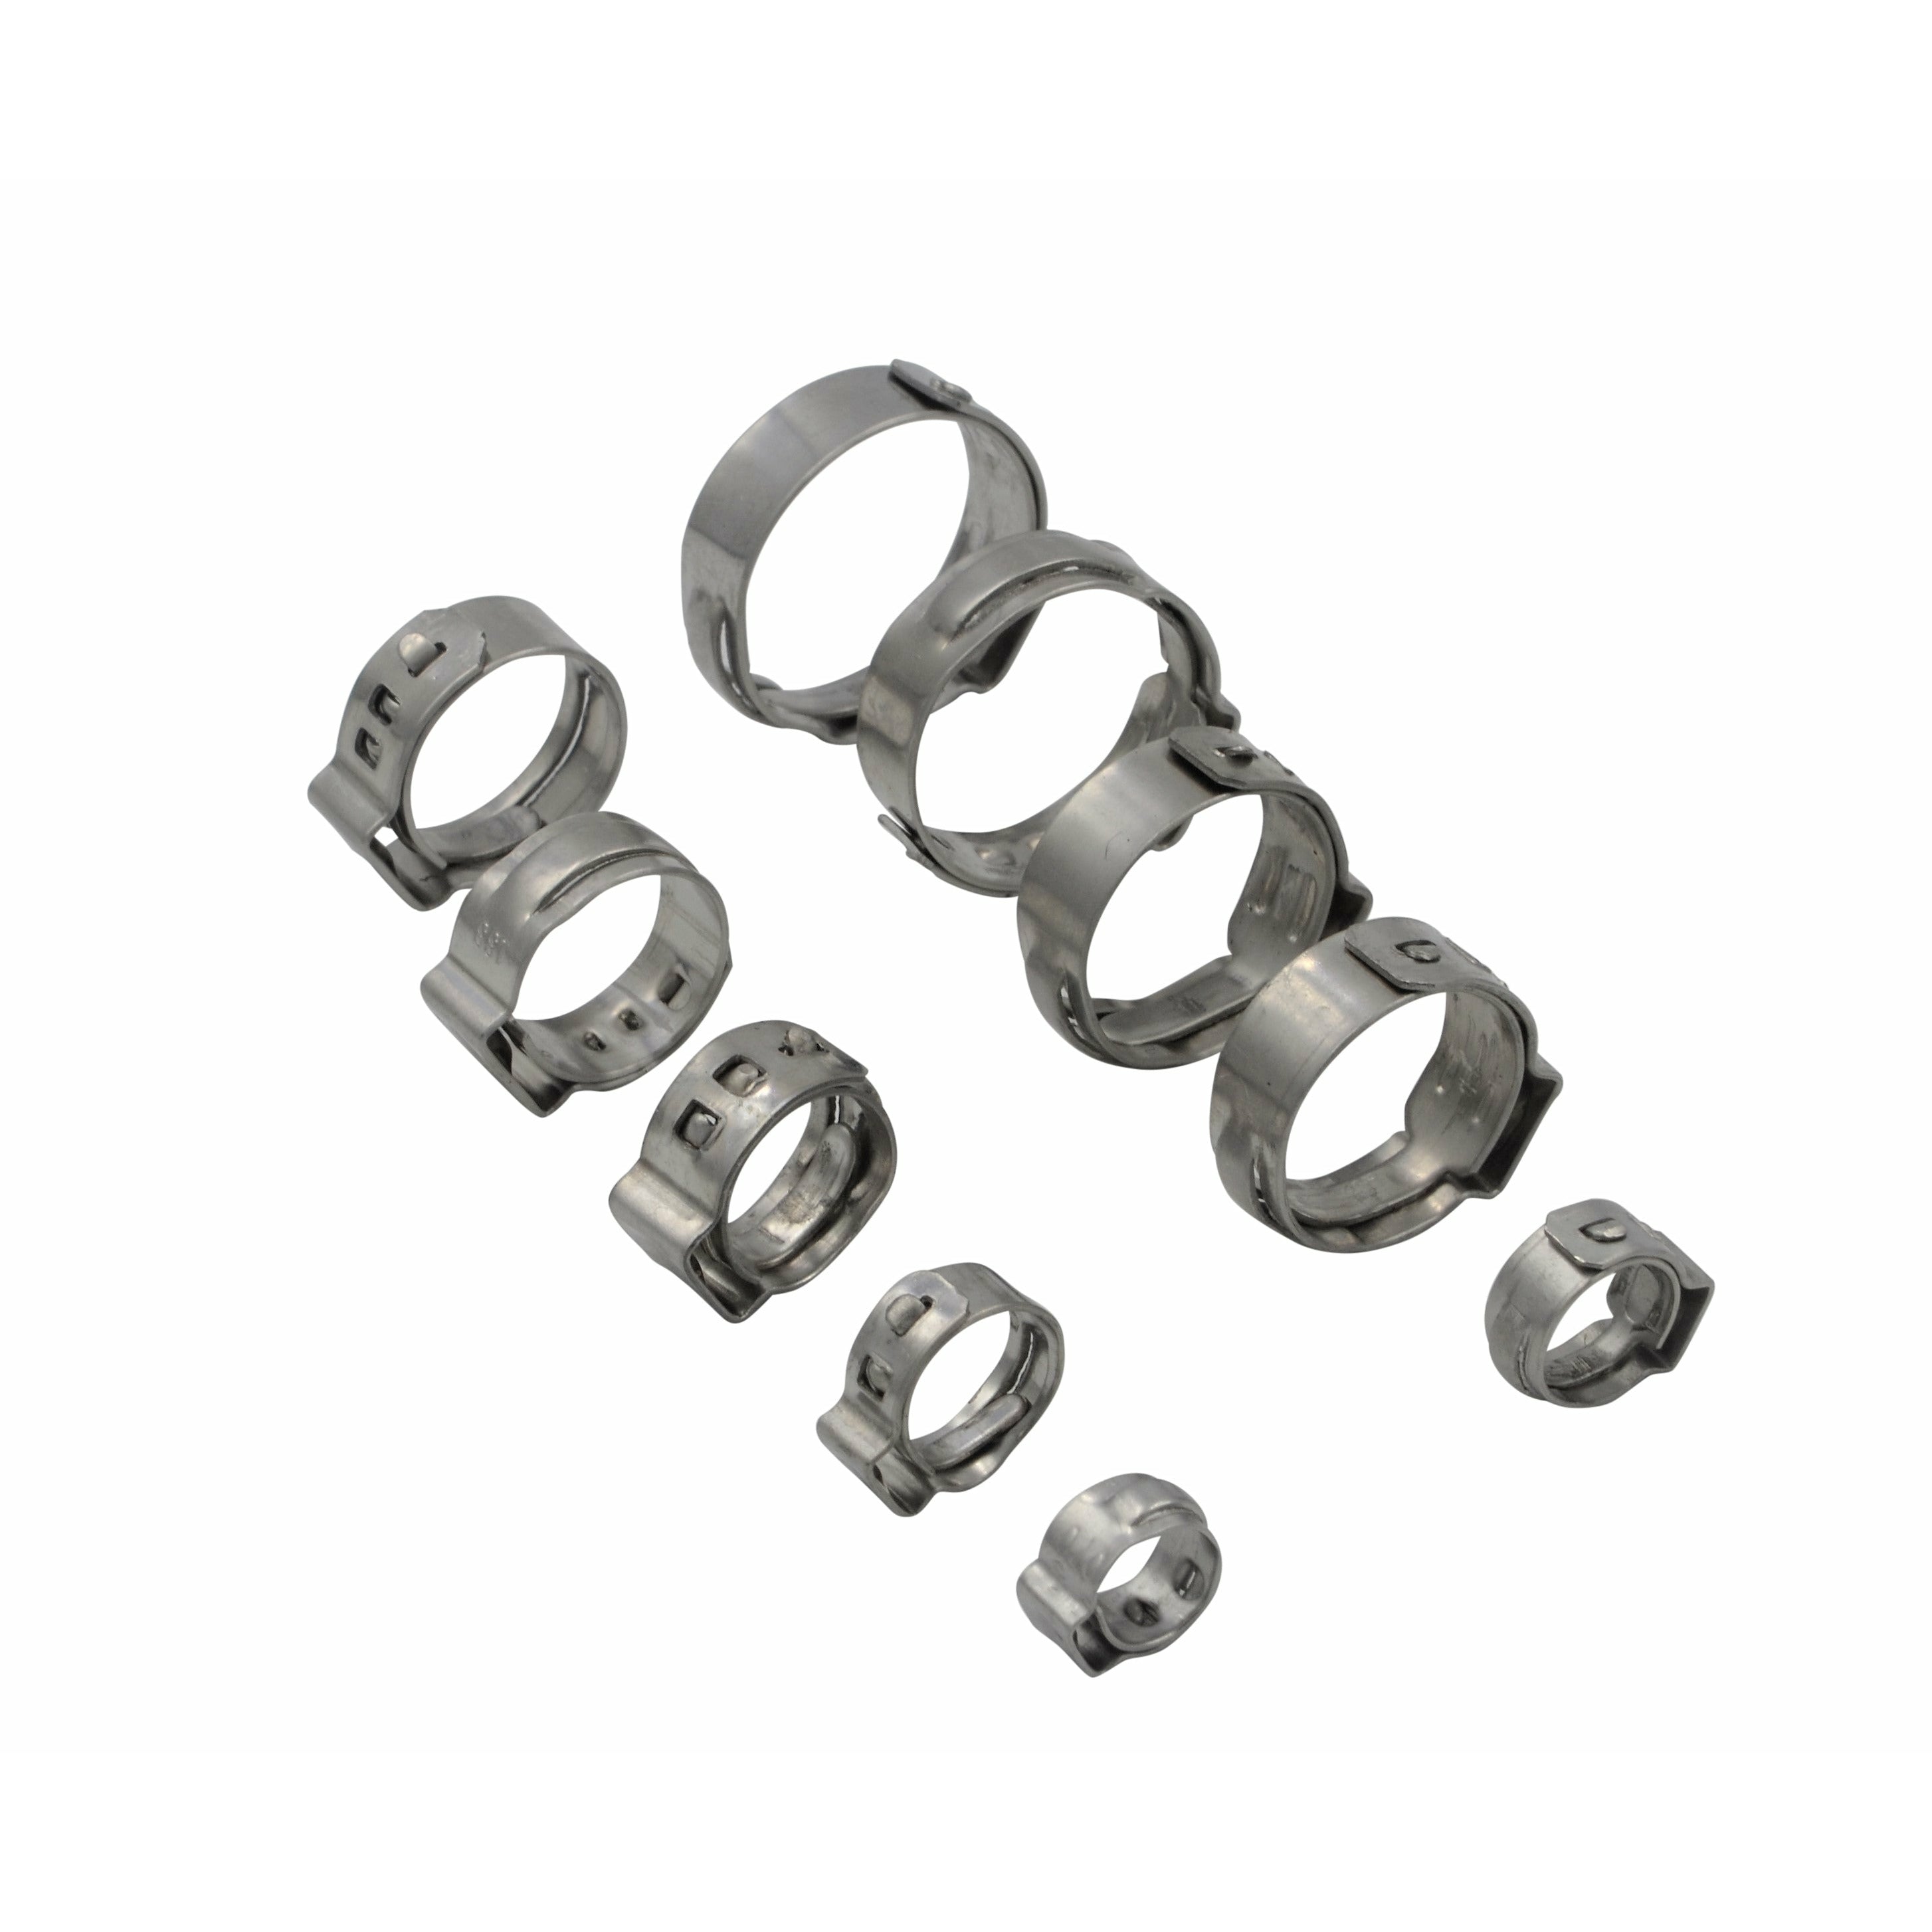 100 Piece 304 Stainless Steel 12-14.5mm Ear Hose Clamp Grab Kit Assortment